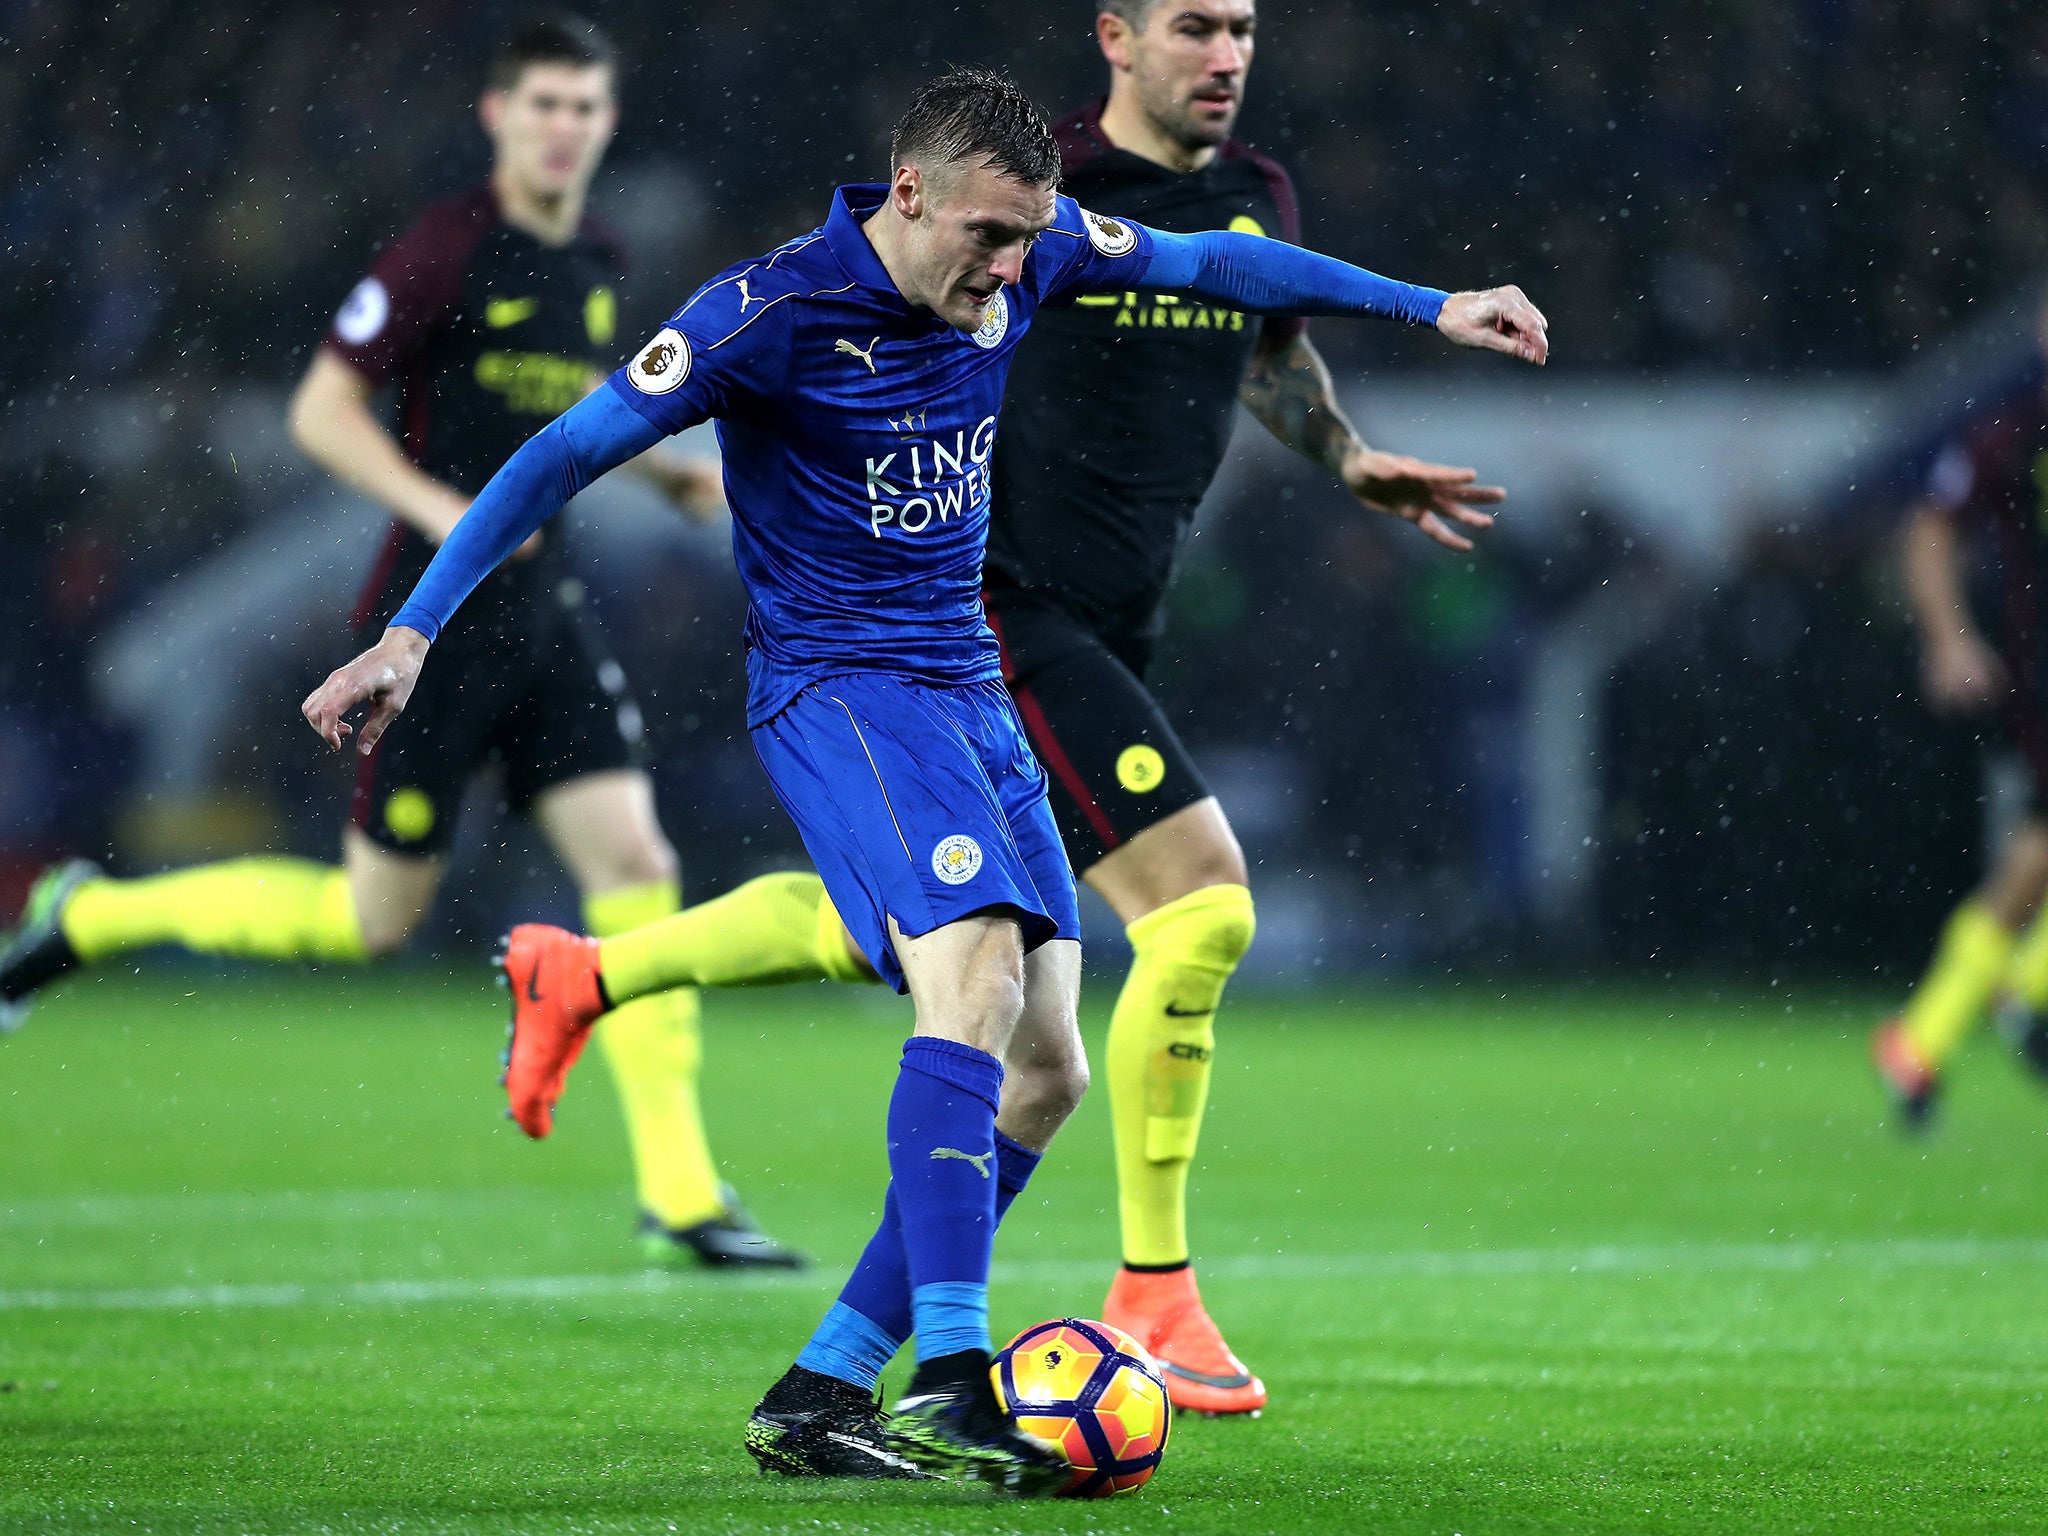 Vardy struck after just three minutes to give Leicester the lead